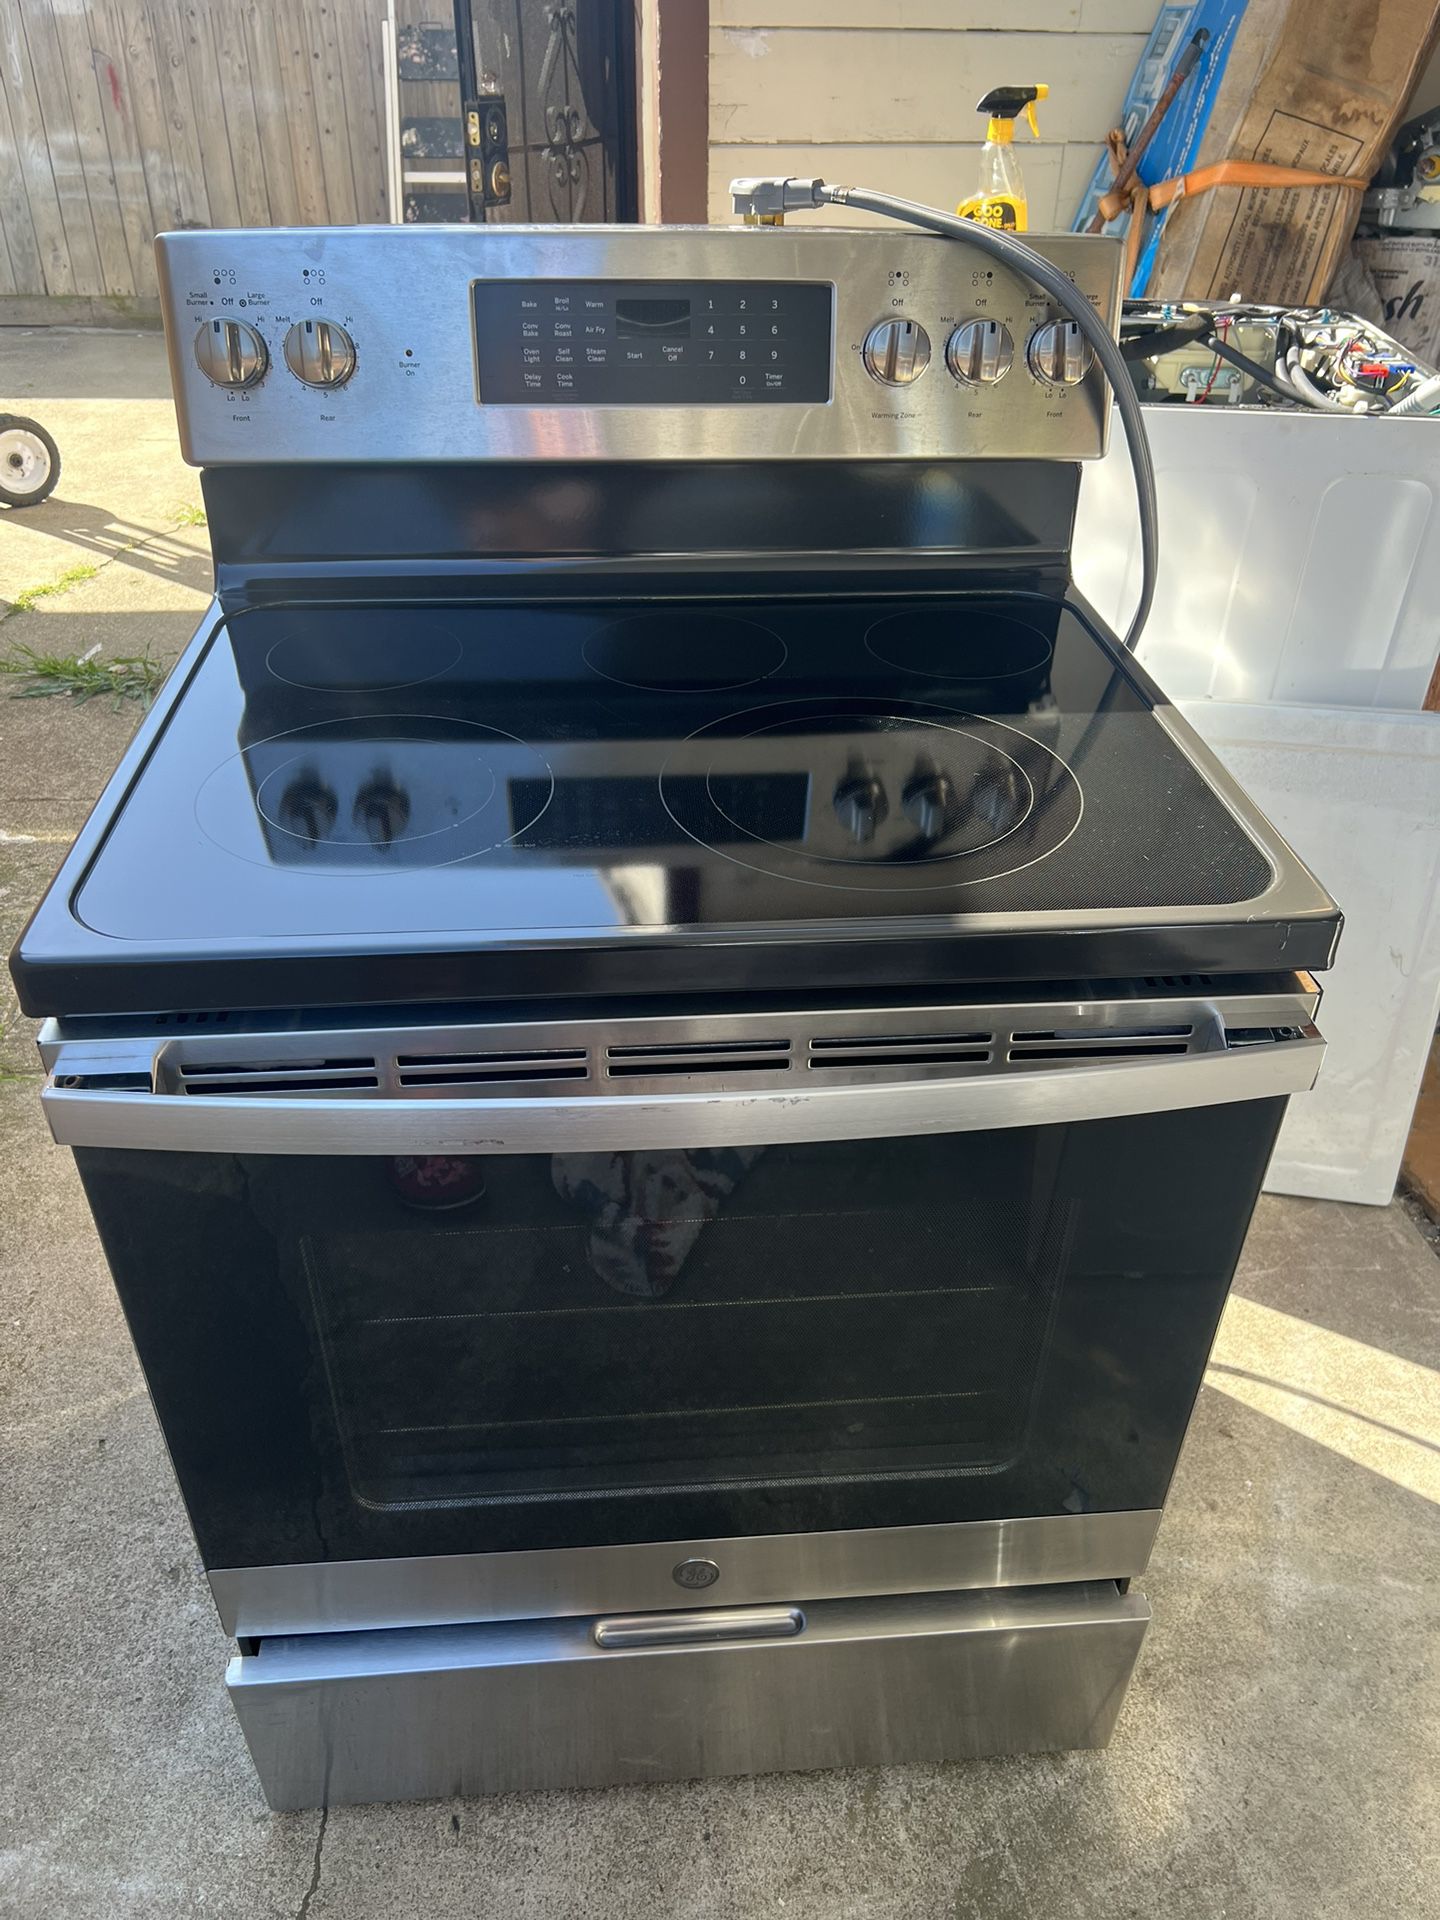 GE electric 220 volts in very good condition looks like new with three months warranty free delivery in the Oakland area outside the Oakland area ther